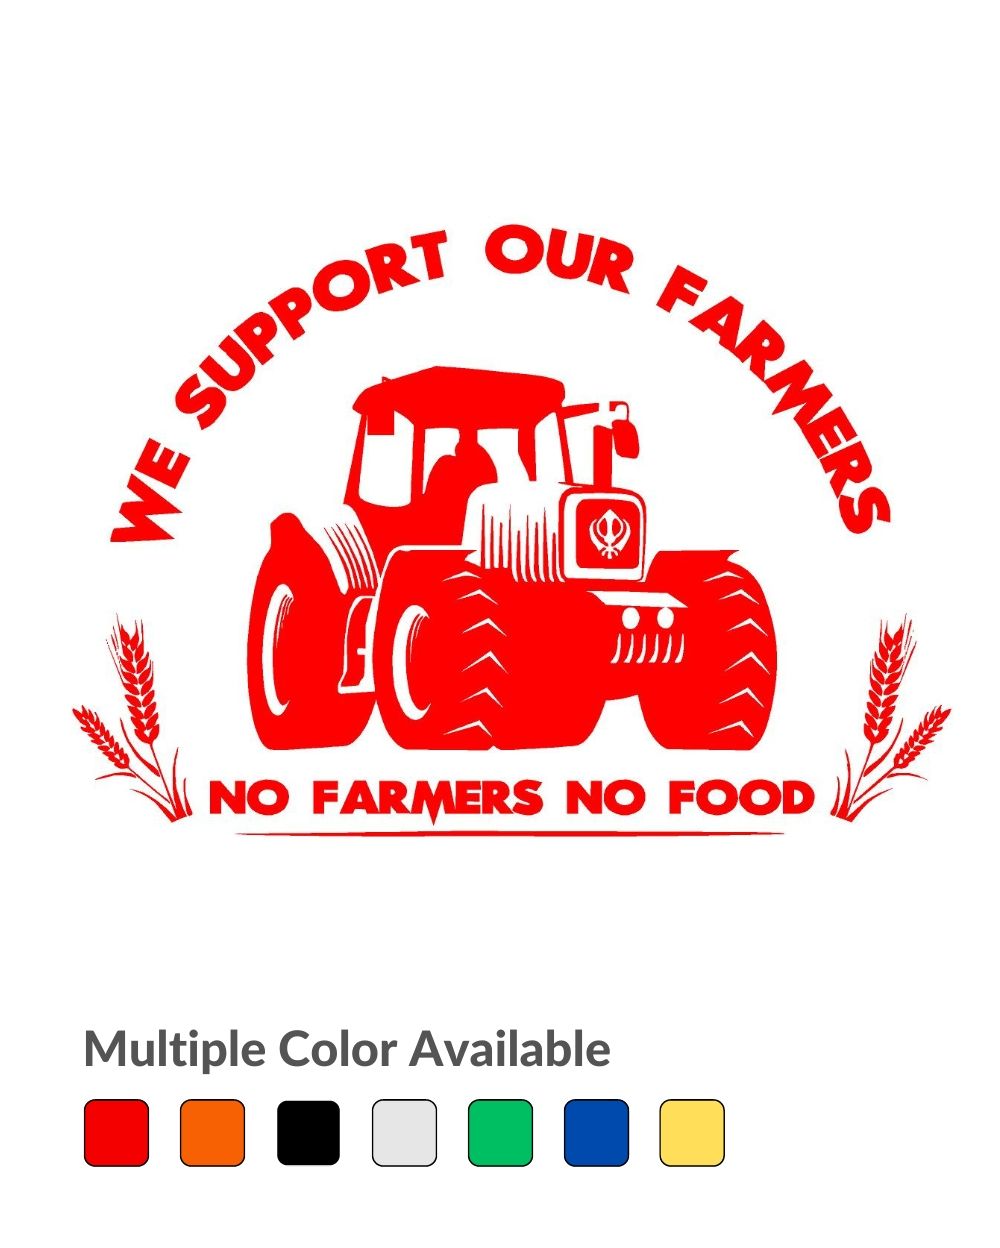 We support our farmers no farmer, no food